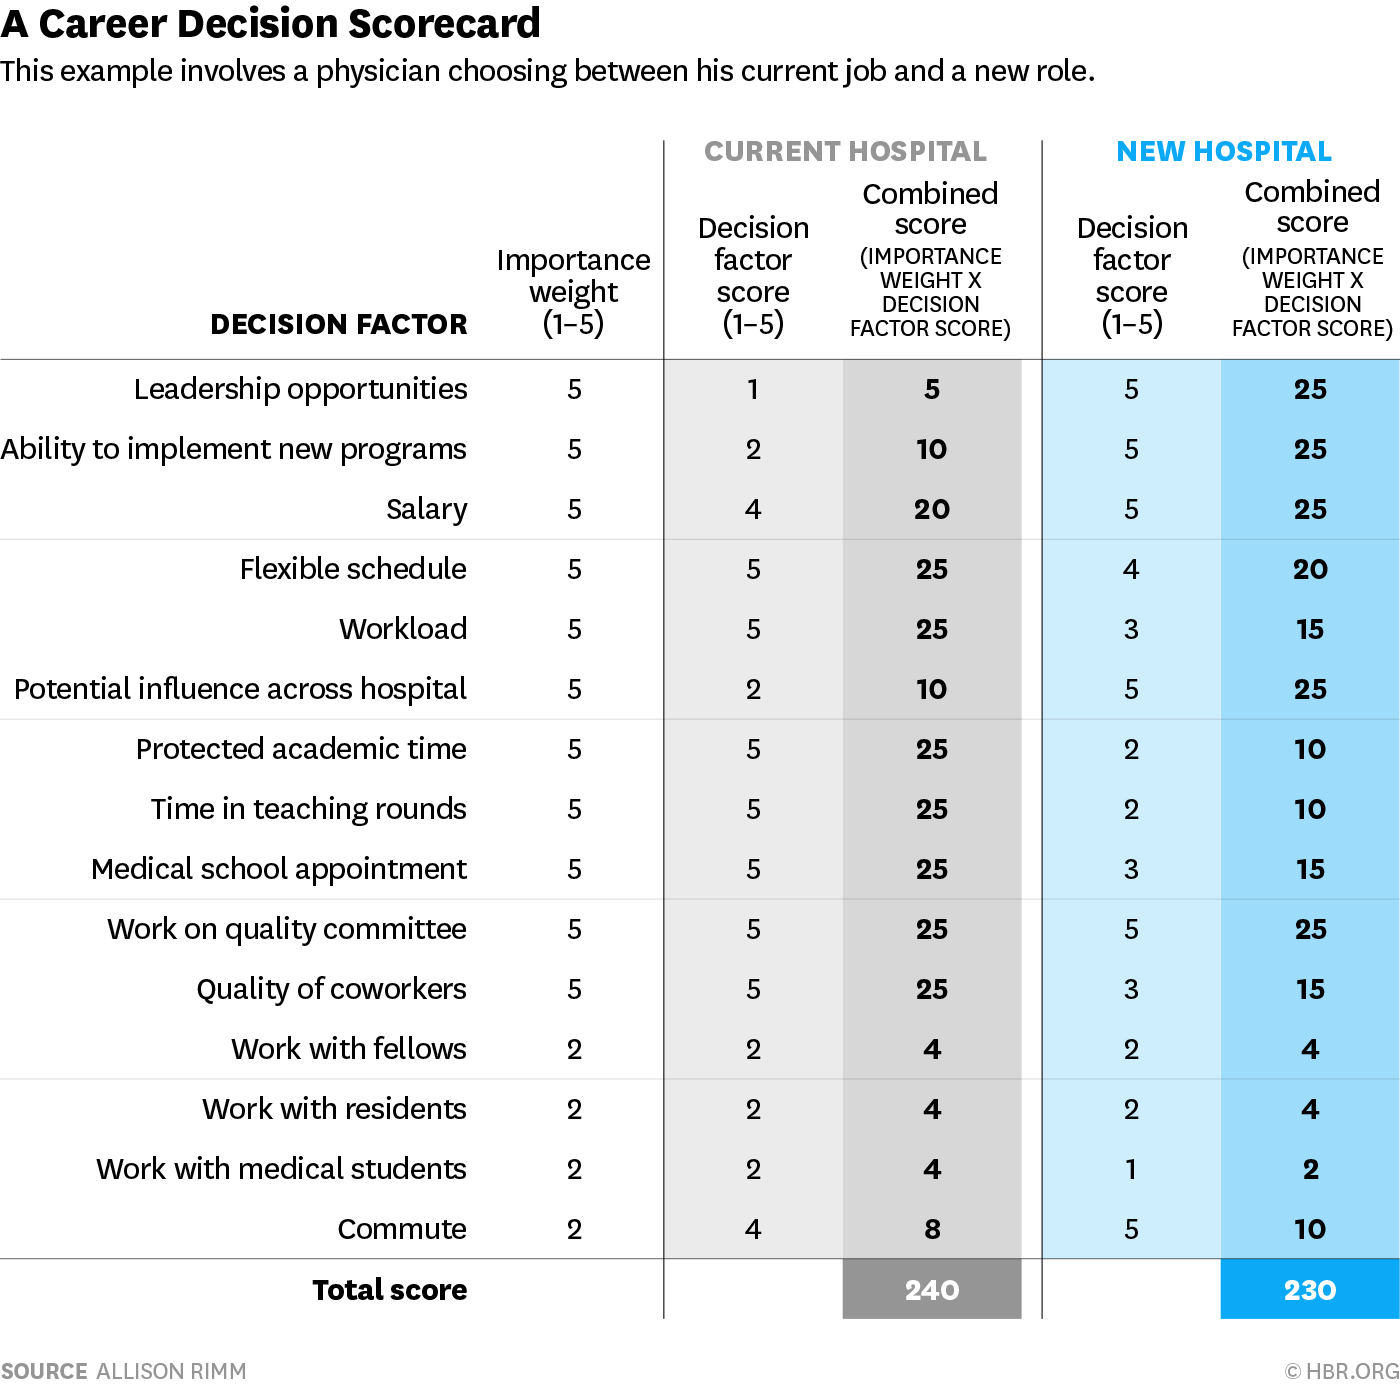 Job Offer Evaluation Spreadsheet In A Scorecard To Help You Compare Two Jobs